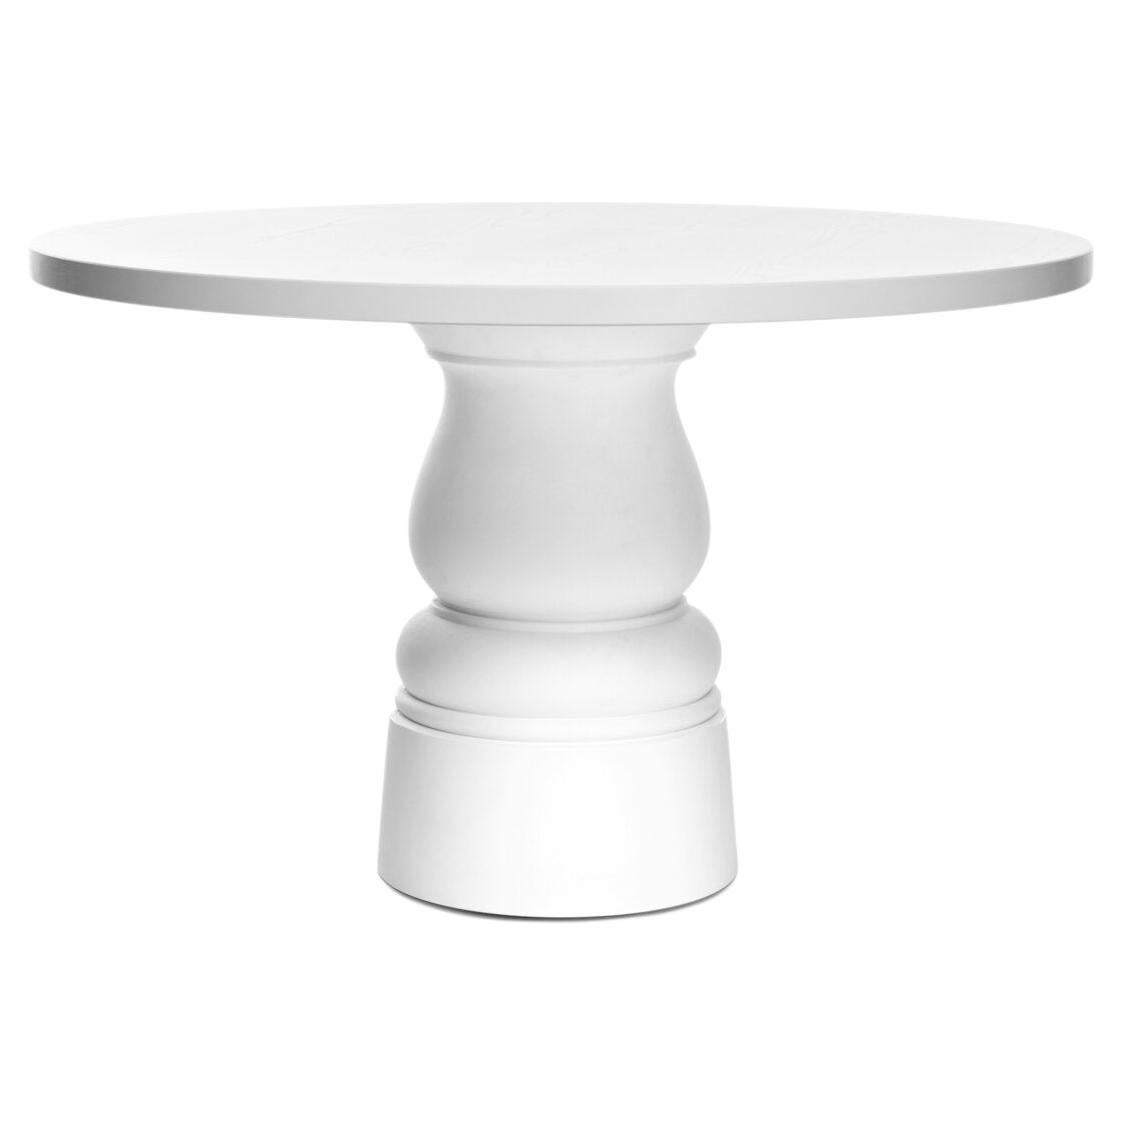 Moooi Container 140 Large Round Dinning Table with White Oak Top